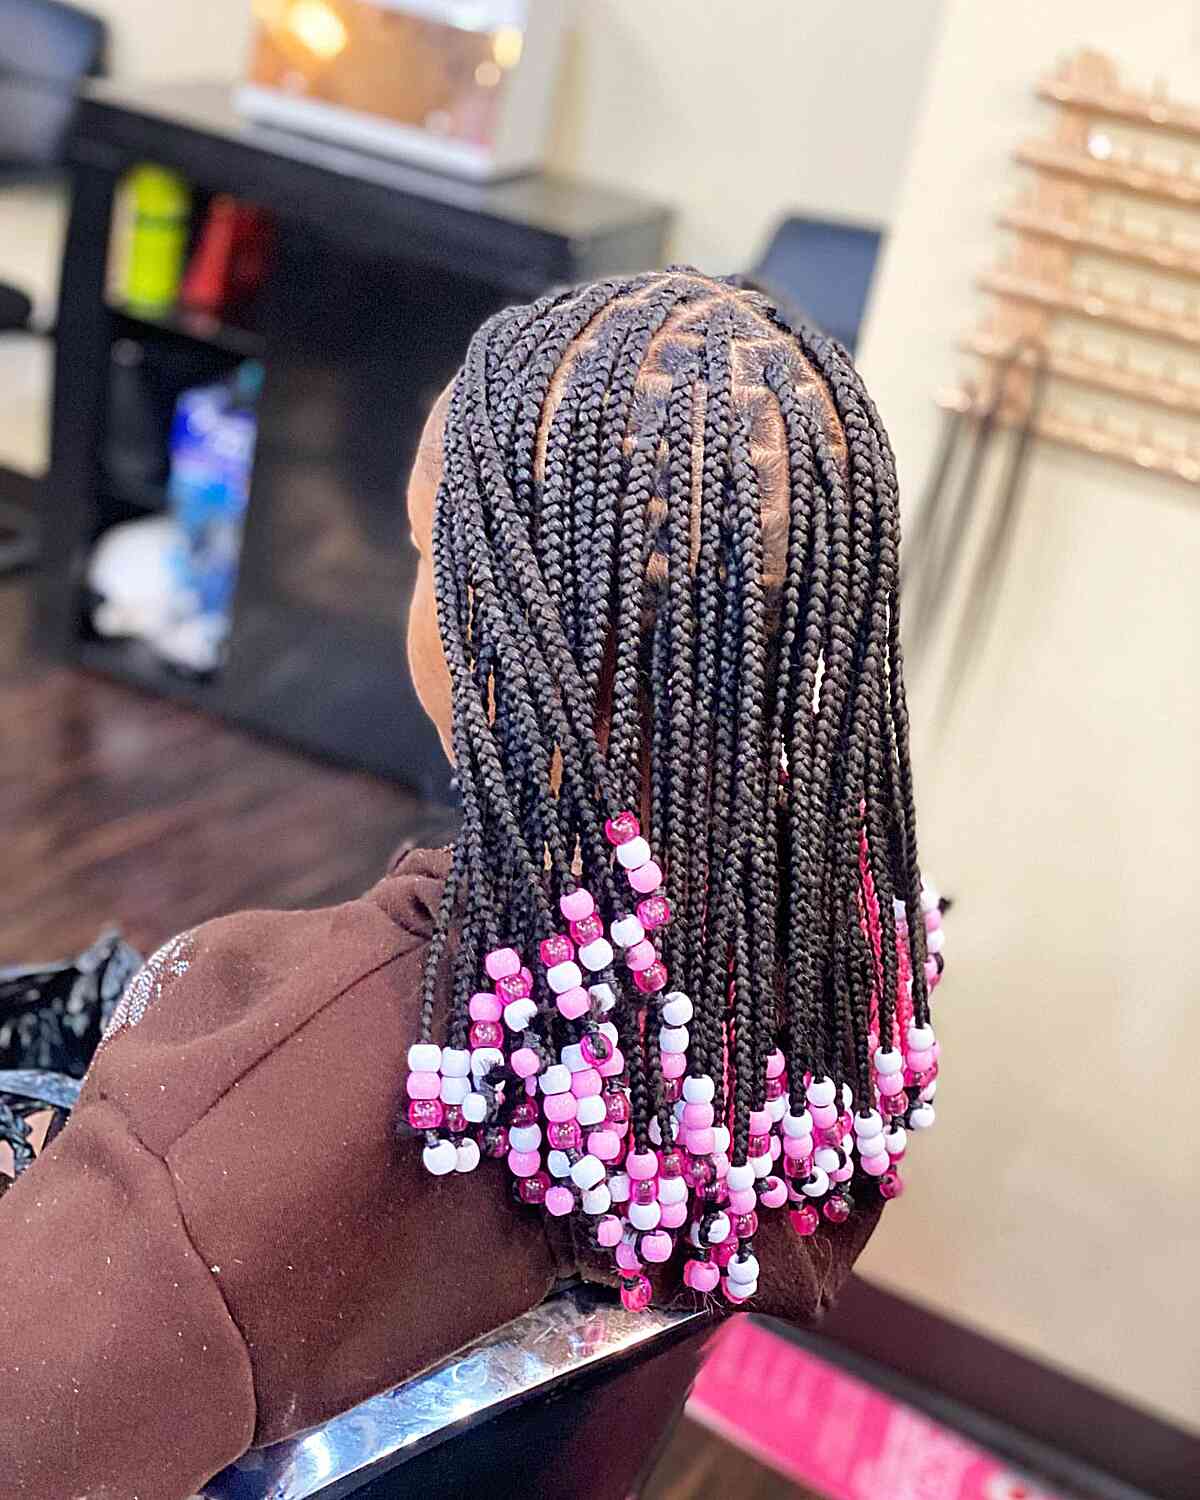 No-Knot Medium Box Braided Style with Pink Beads